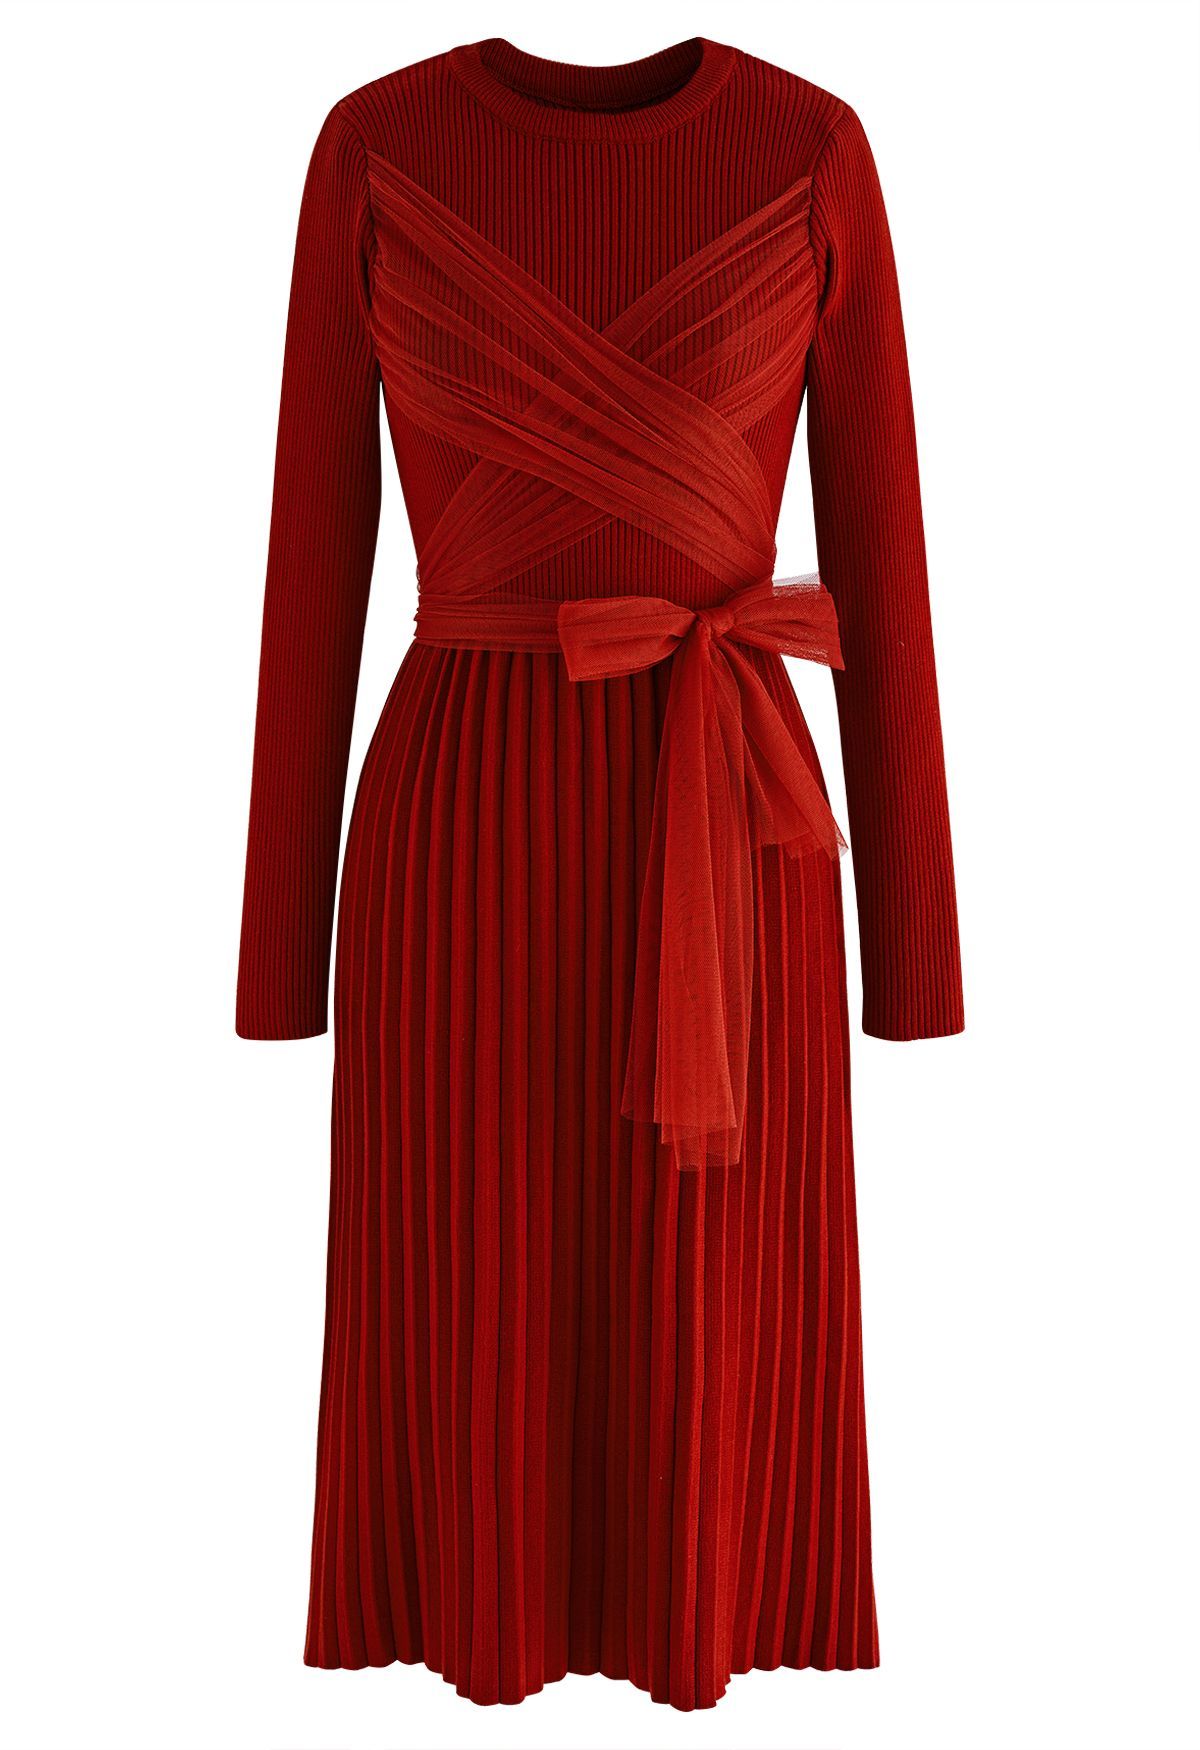 Self-Tie Mesh Bow Ribbed Knit Dress in Red | Chicwish